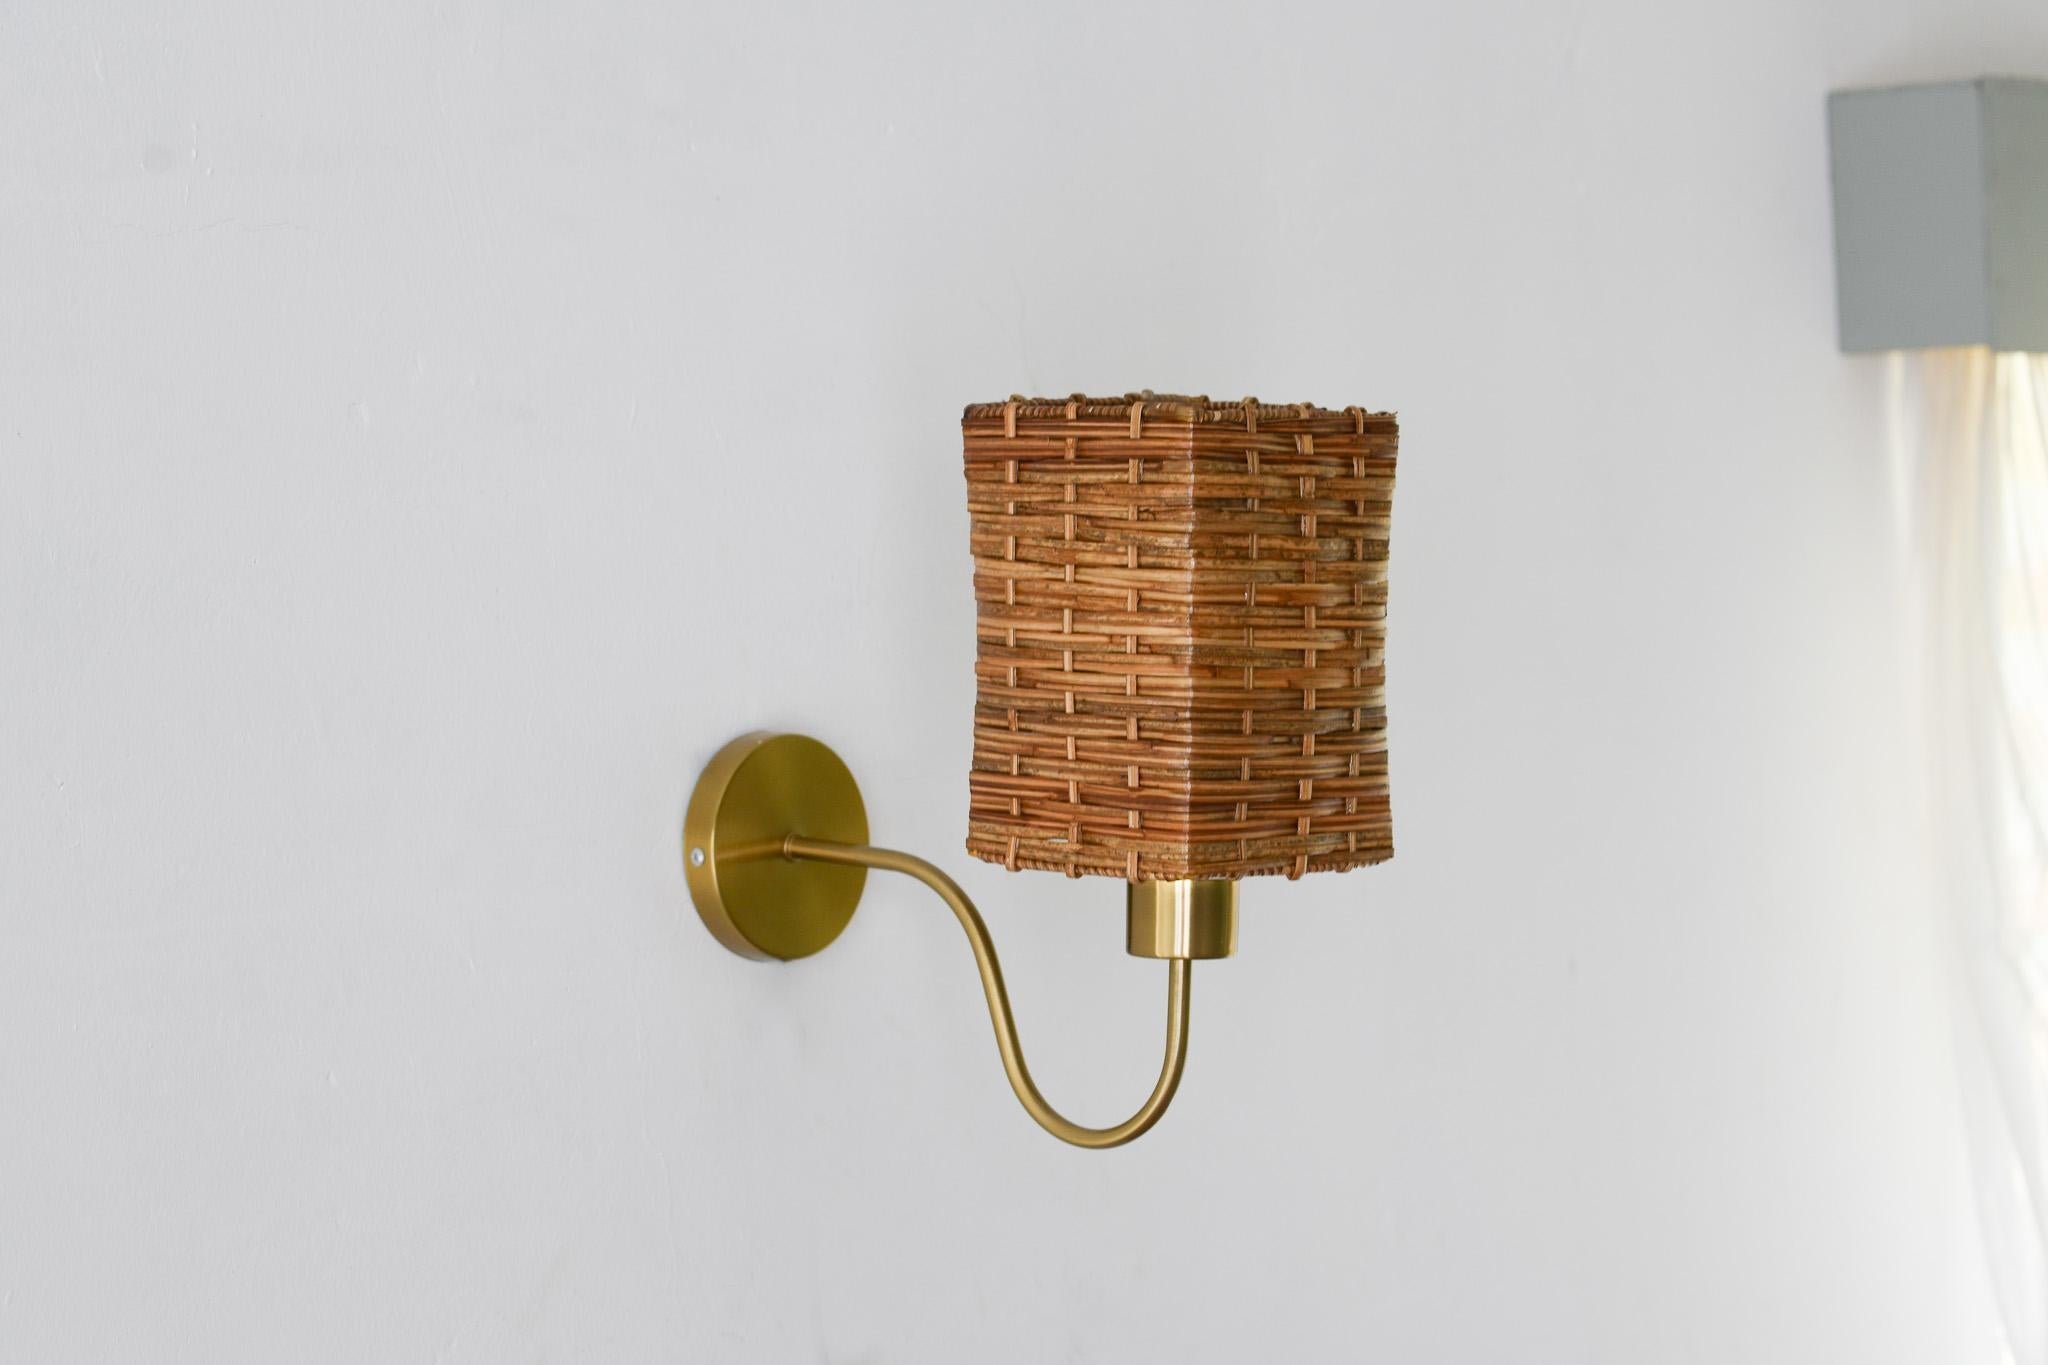 Introducing this handcrafted vintage-style square wicker wall sconce with gold accent. Each piece is uniquely made by local artisans in the Philippines, making it a one-of-a-kind addition to any room. The natural rattan cane gives it an elegant